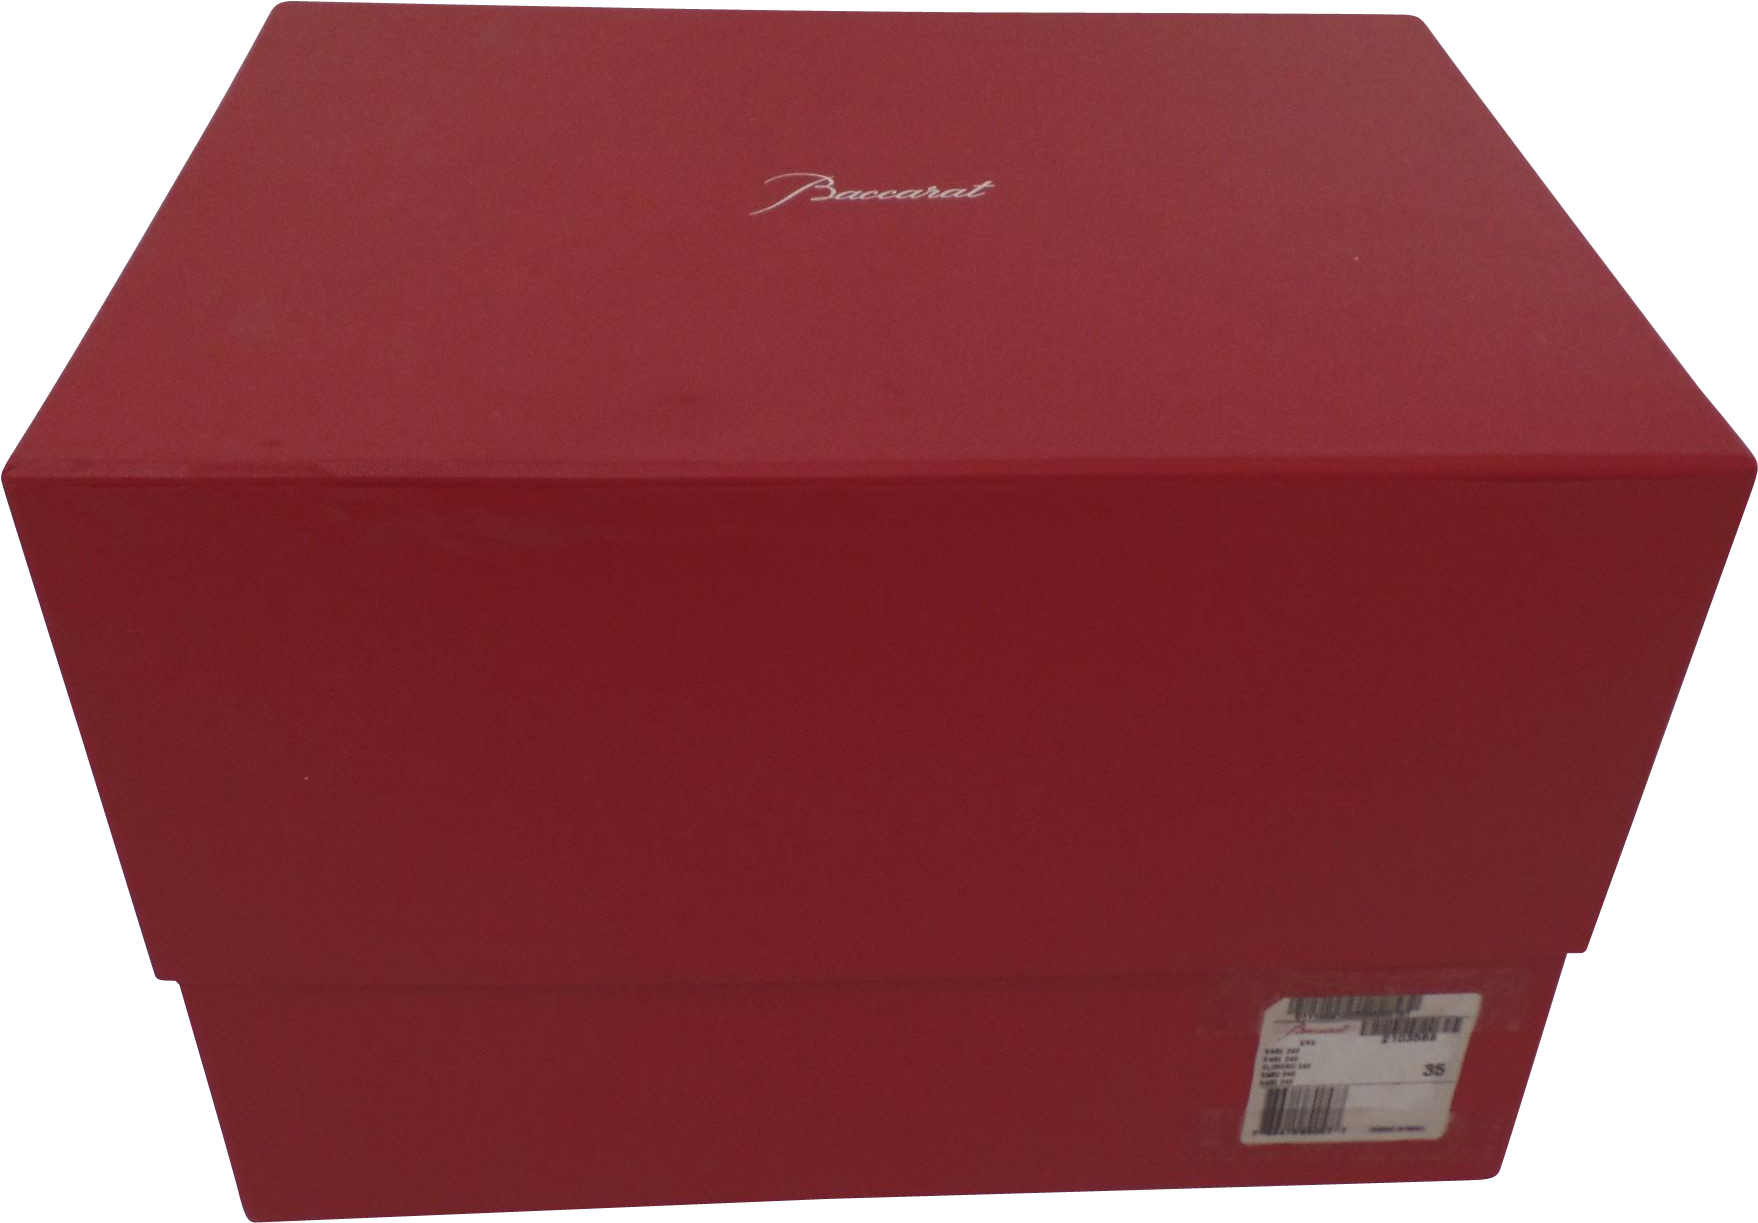 A Red Box With A Label